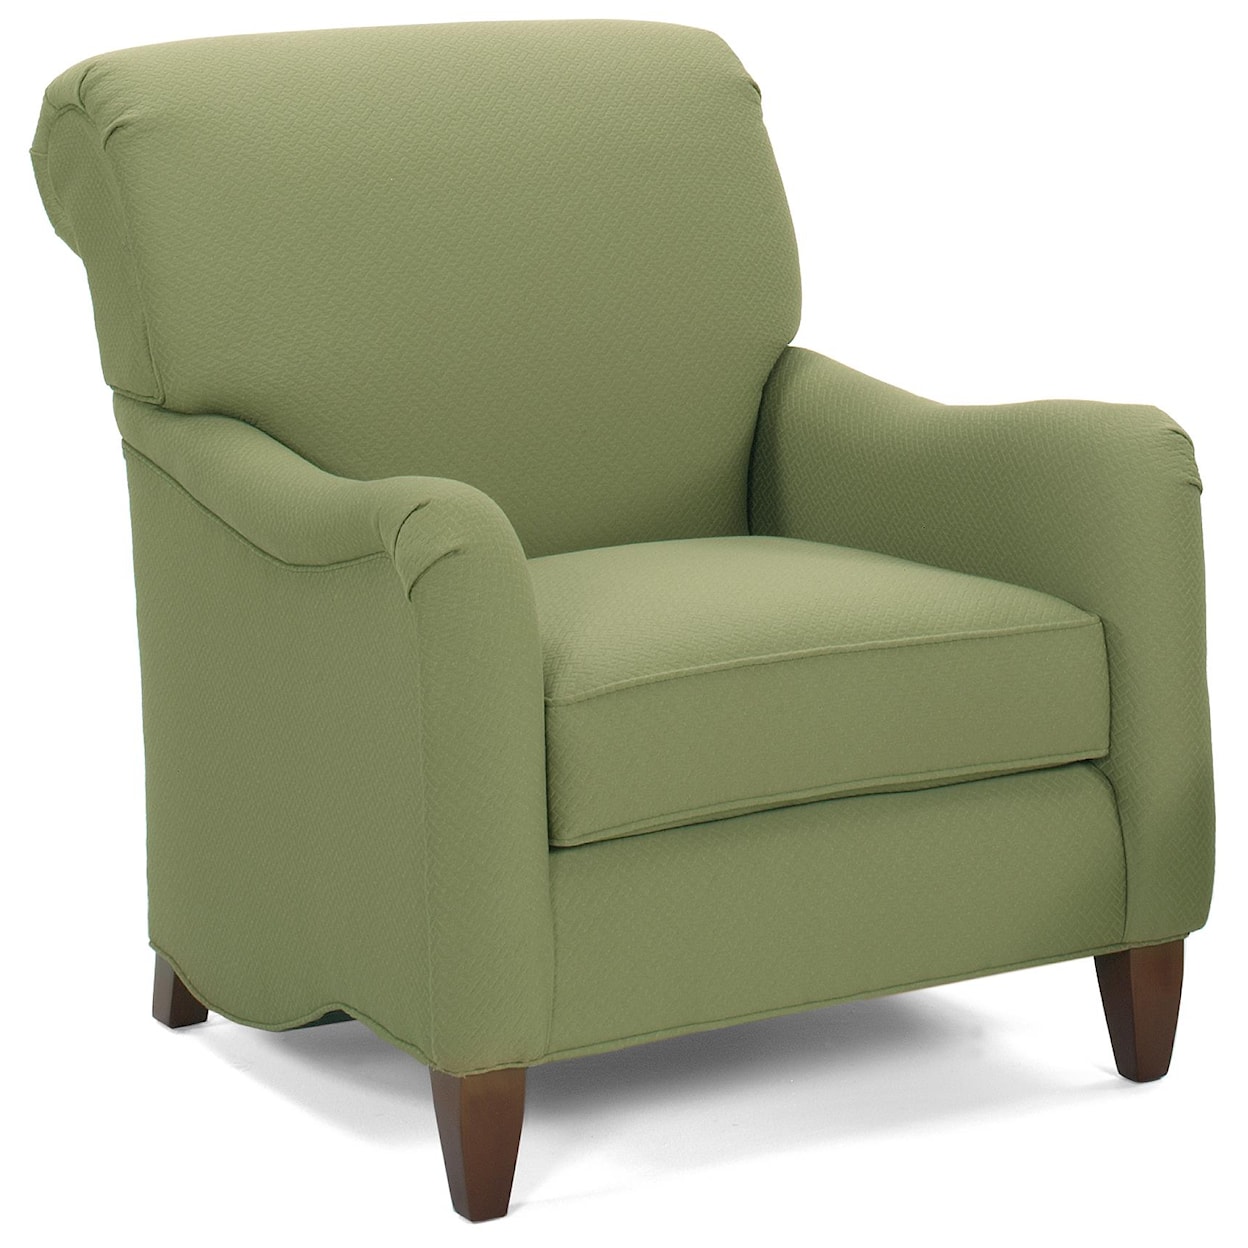 Temple Furniture Donavan Traditional Upholstered Chair